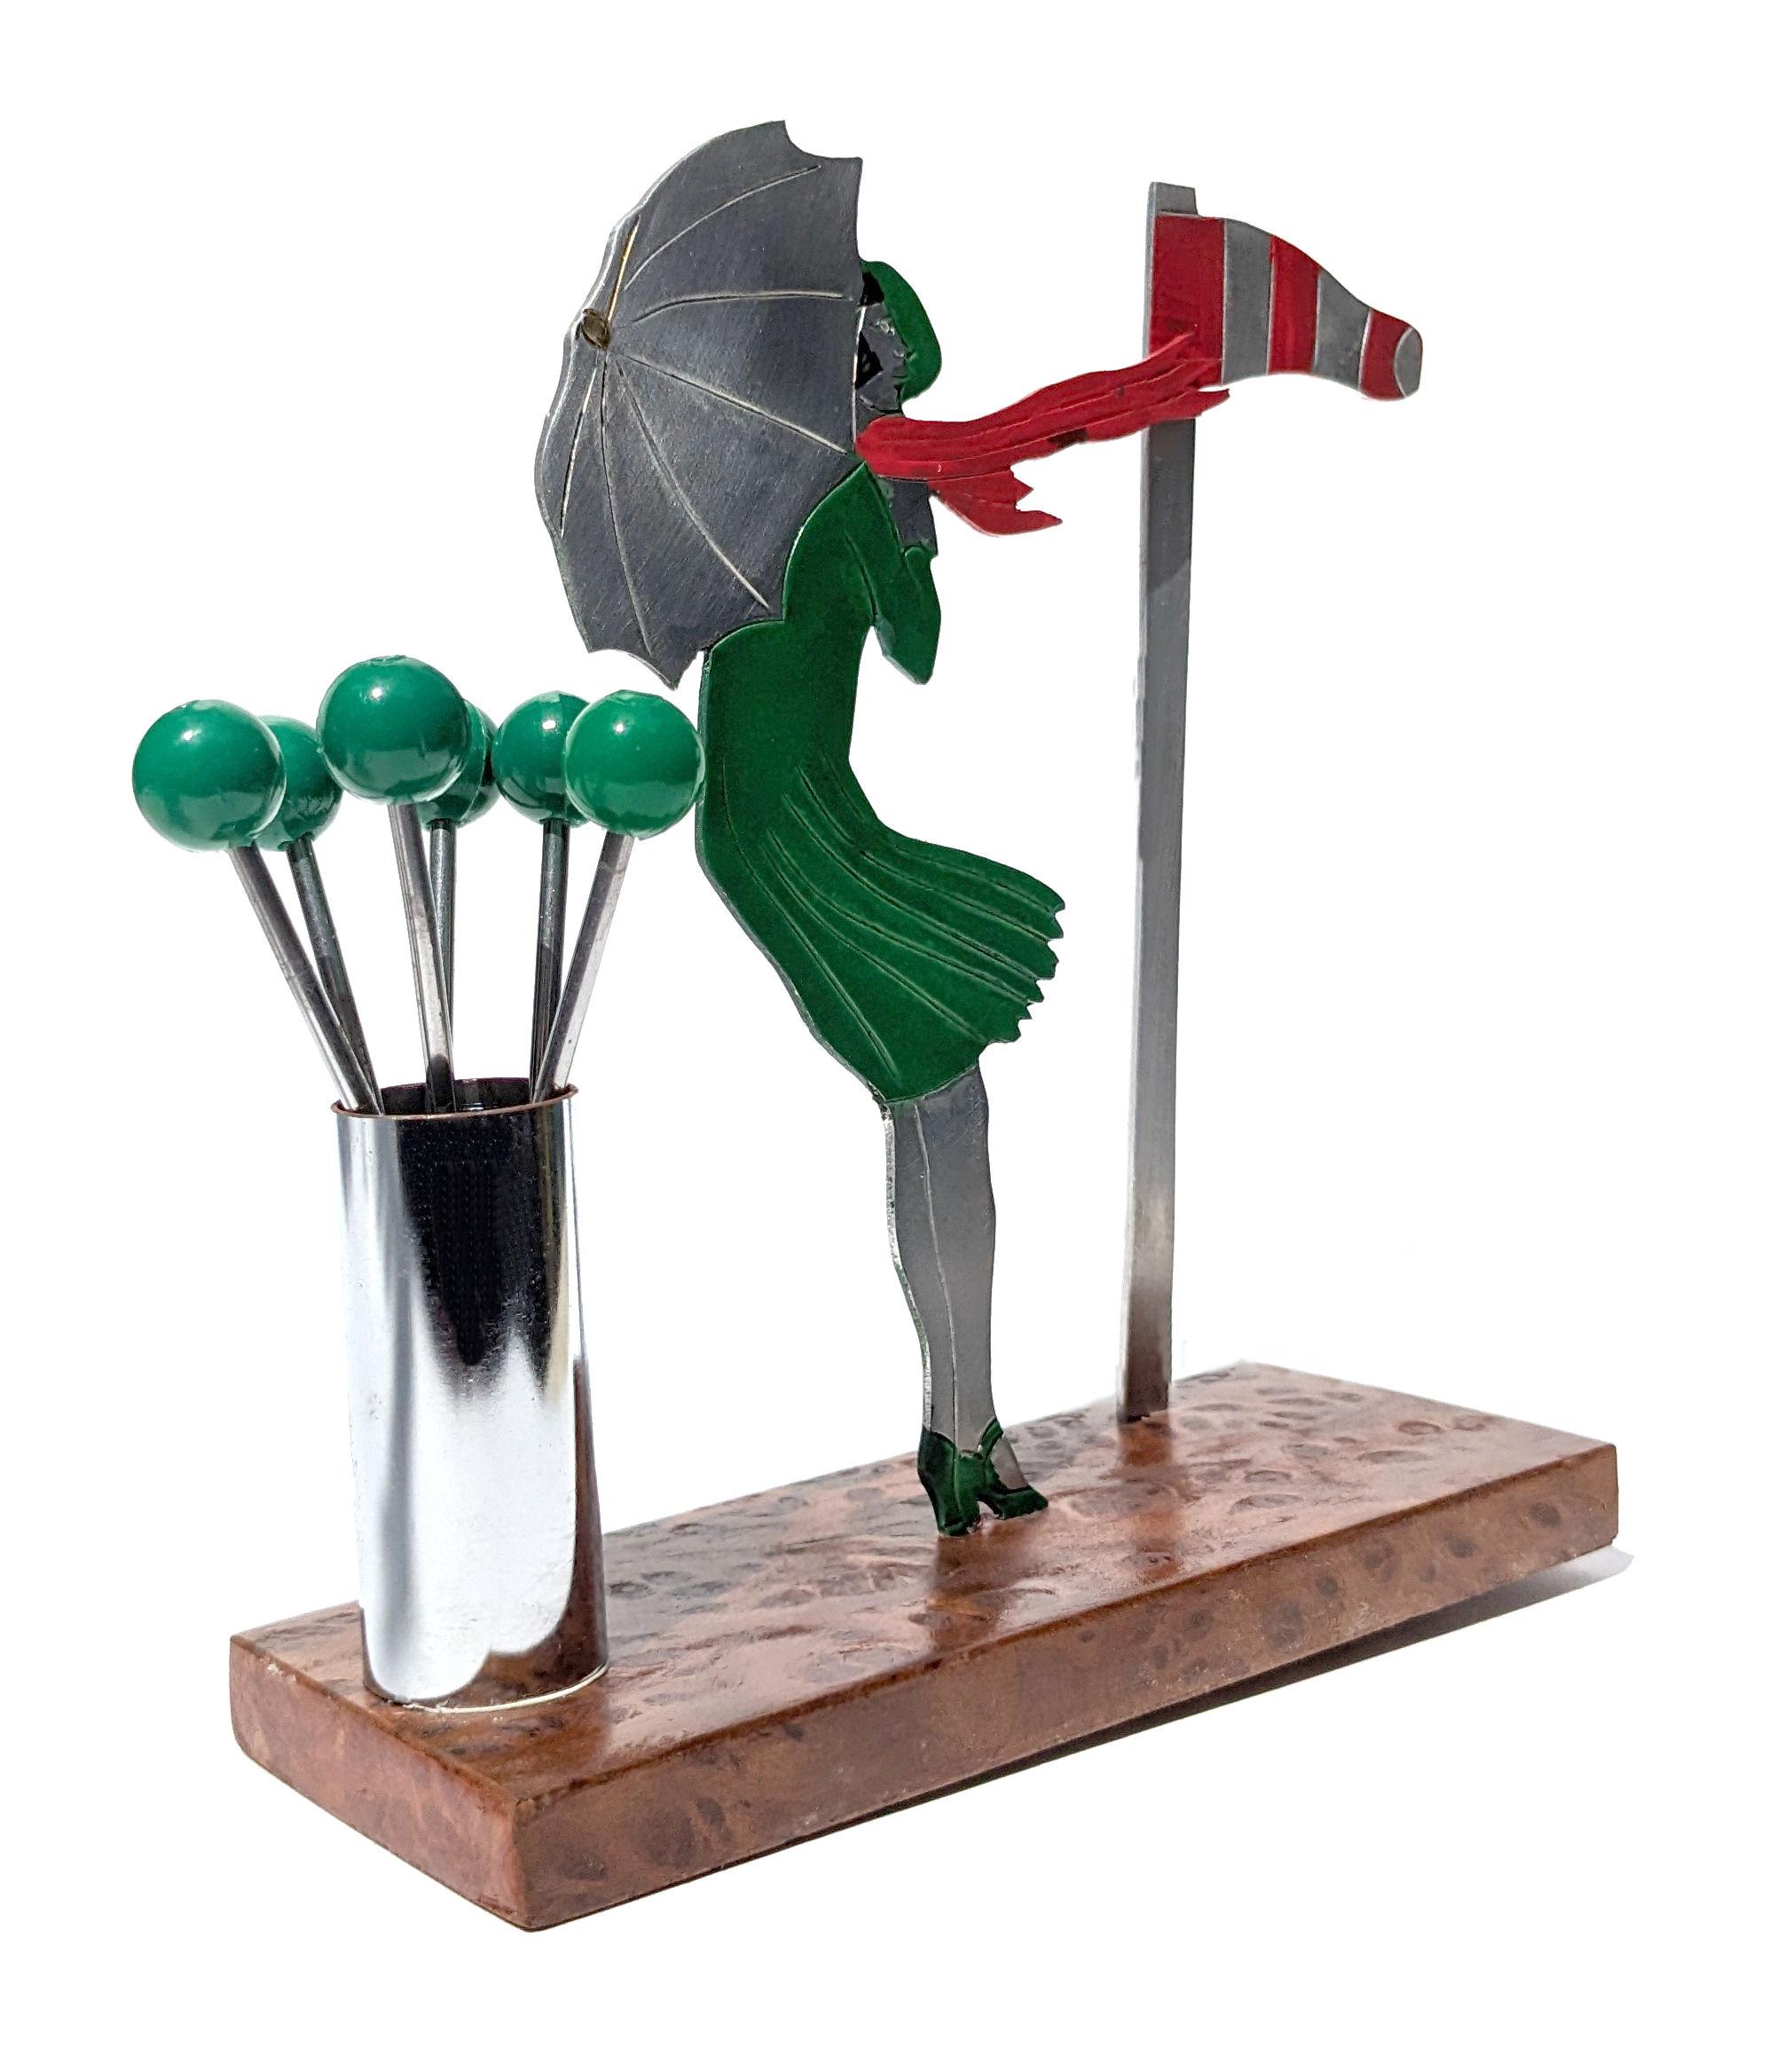 French Art Deco Barware, Novelty Cocktail Sticks 'Windy Golfing' By Sudre, c 1930's